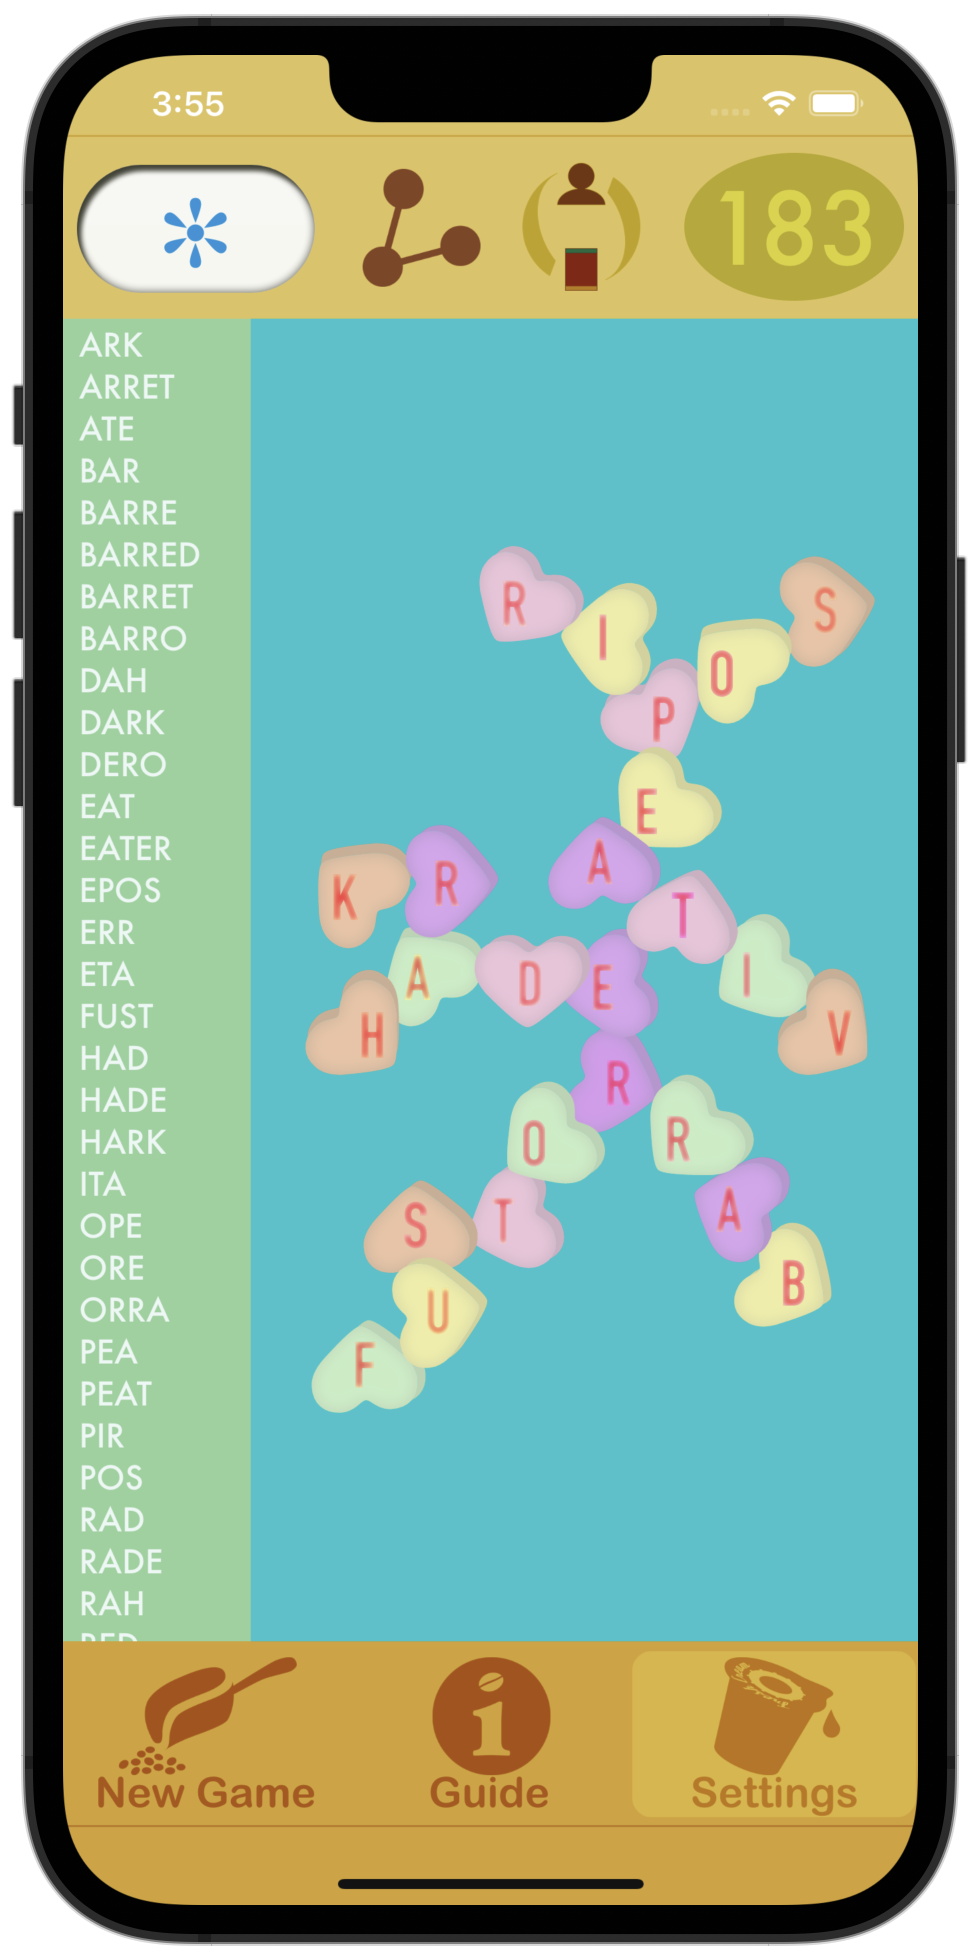 Love Letters 183 points with BARRED